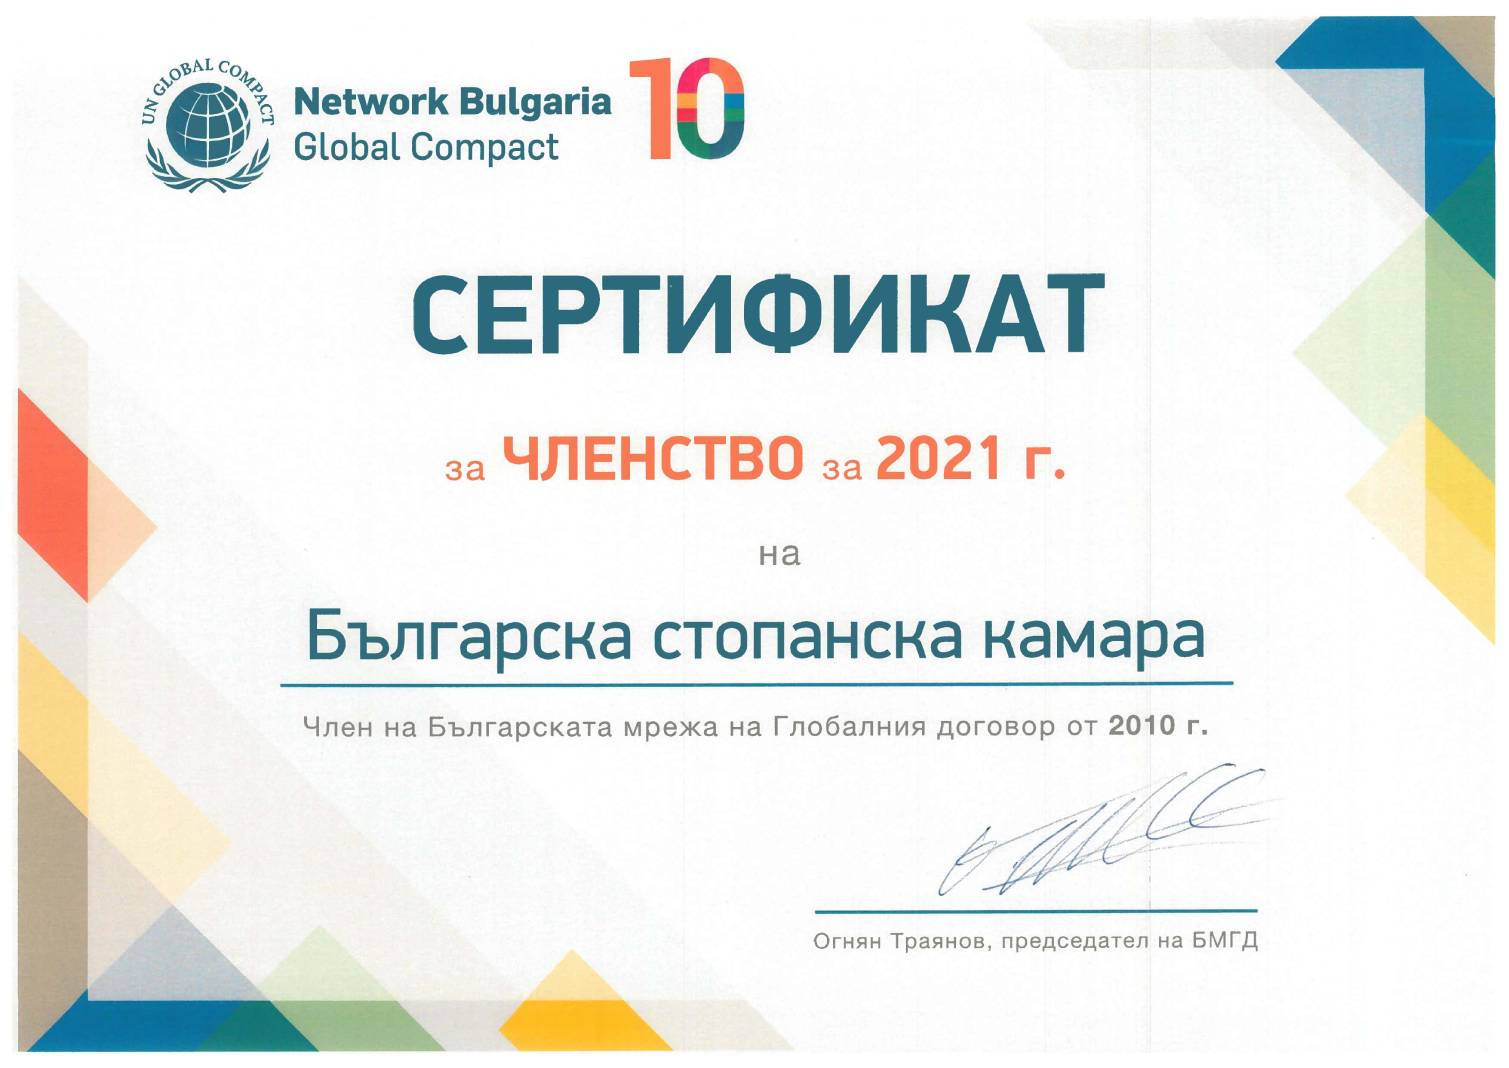 BIA - Member of the Bulgarian Network of the UN Global Compact for a tenth consequent year